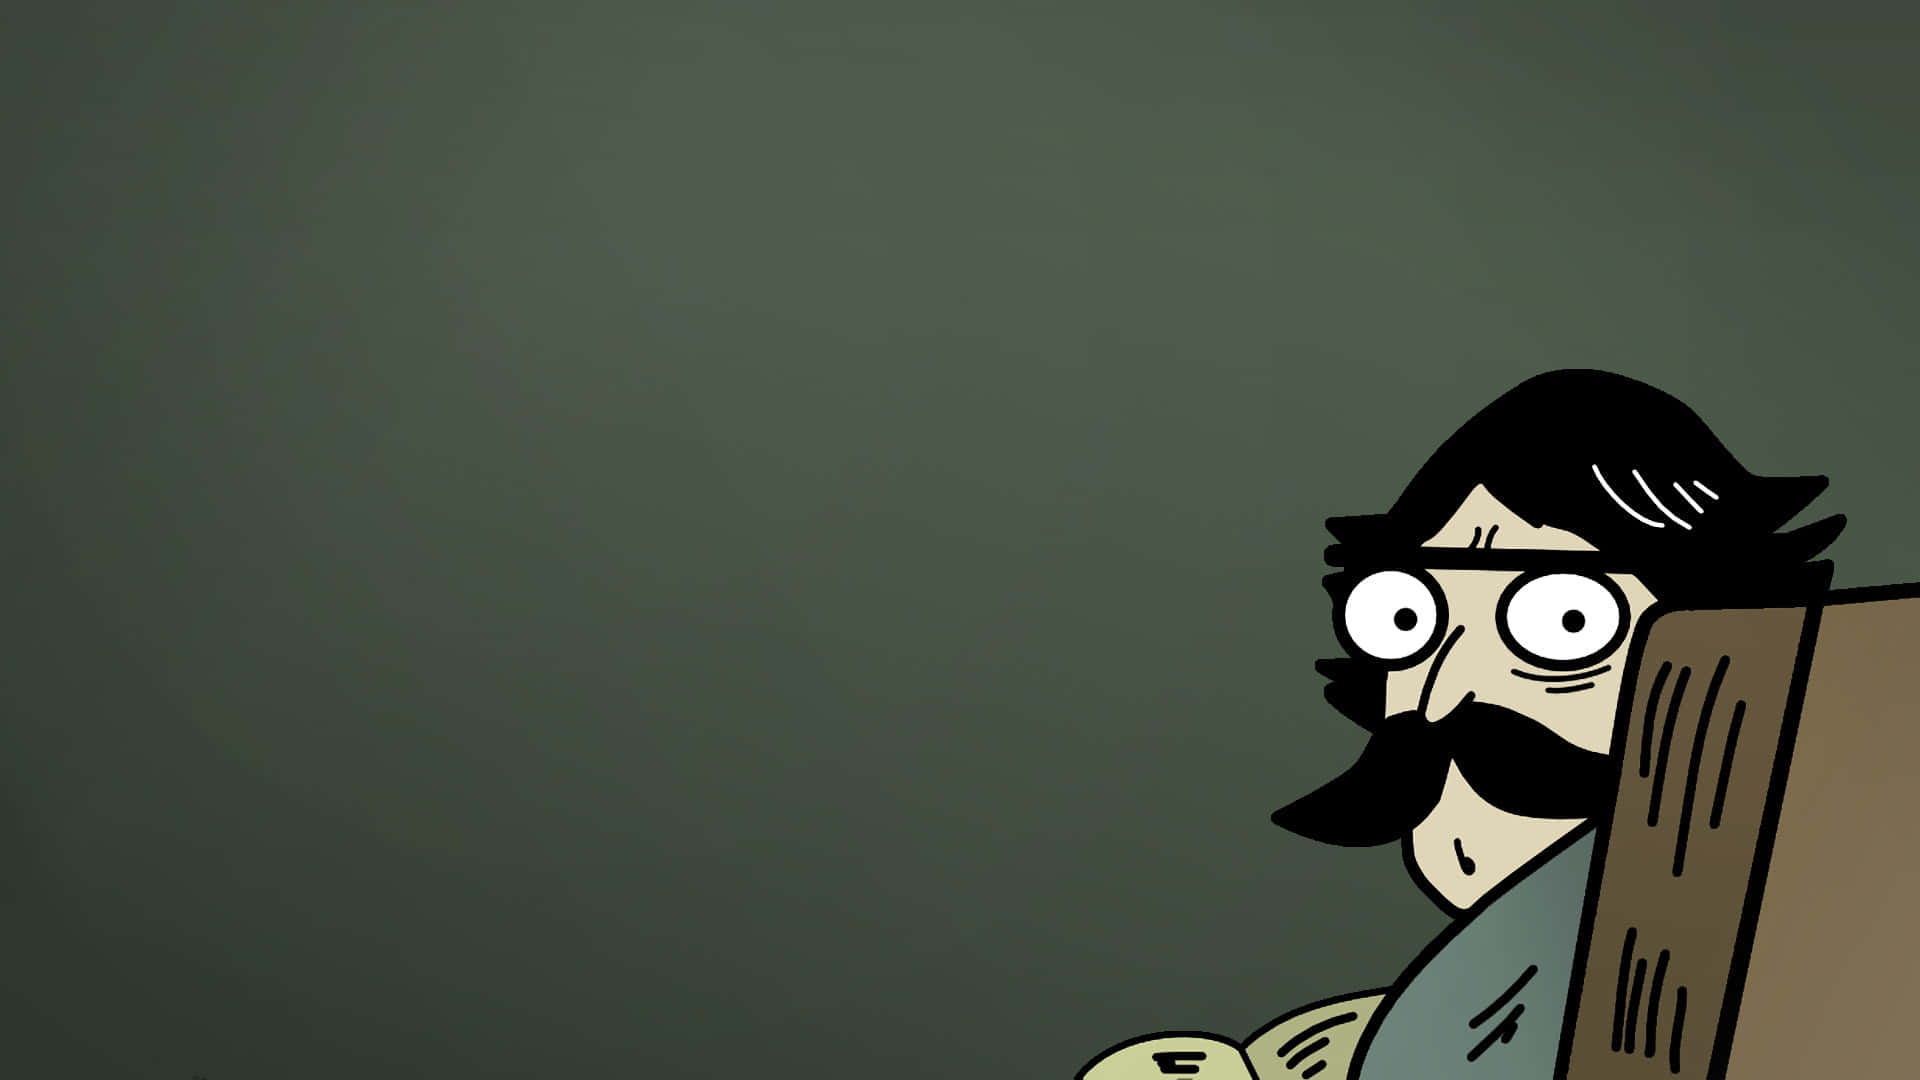 A Cartoon Man With A Mustache And Glasses Sitting In Front Of A Dark Room Wallpaper